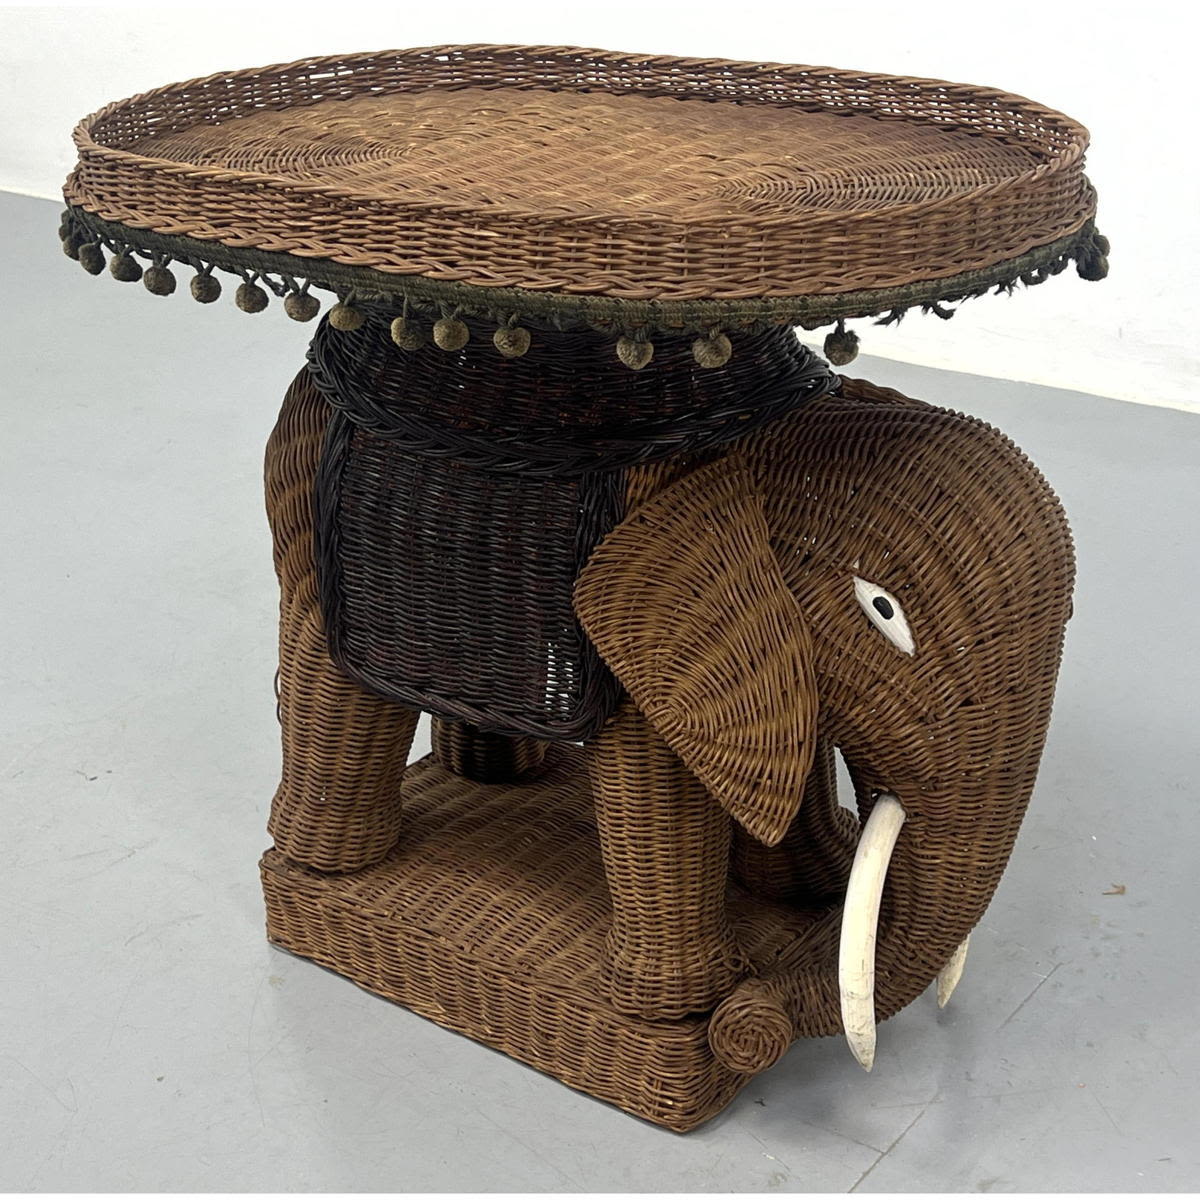 Woven Wicker Figural Elephant Stand